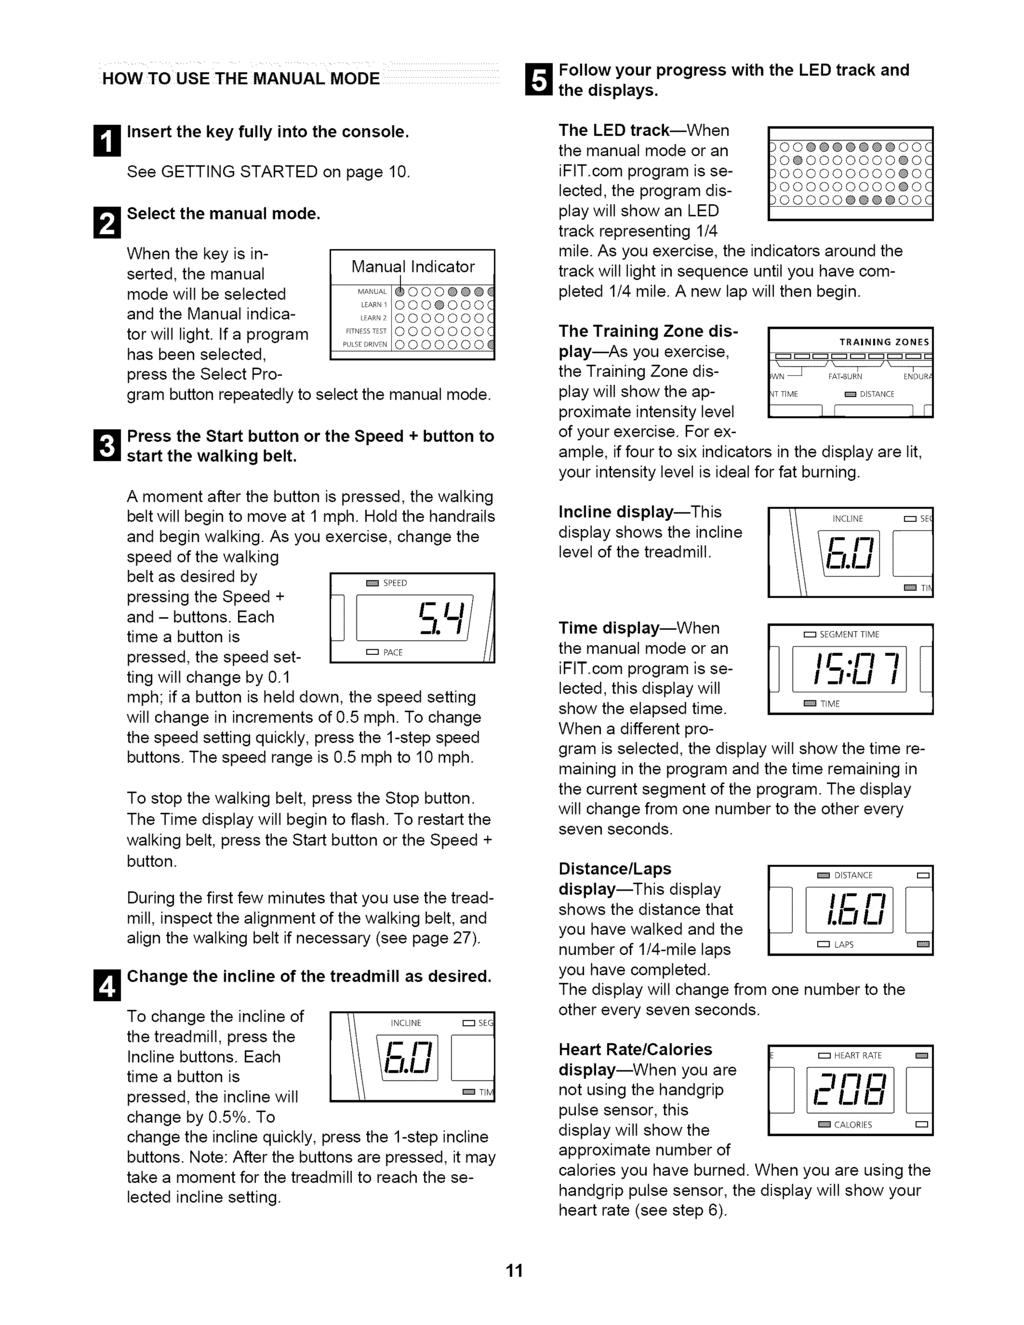 HOW TO USE THE MANUAL MODE _ llw yur prgress with the LED track and the displays. _1 Insert the key fully int the cnsle. See GETTING STARTED n page 10. Select the manual mde.